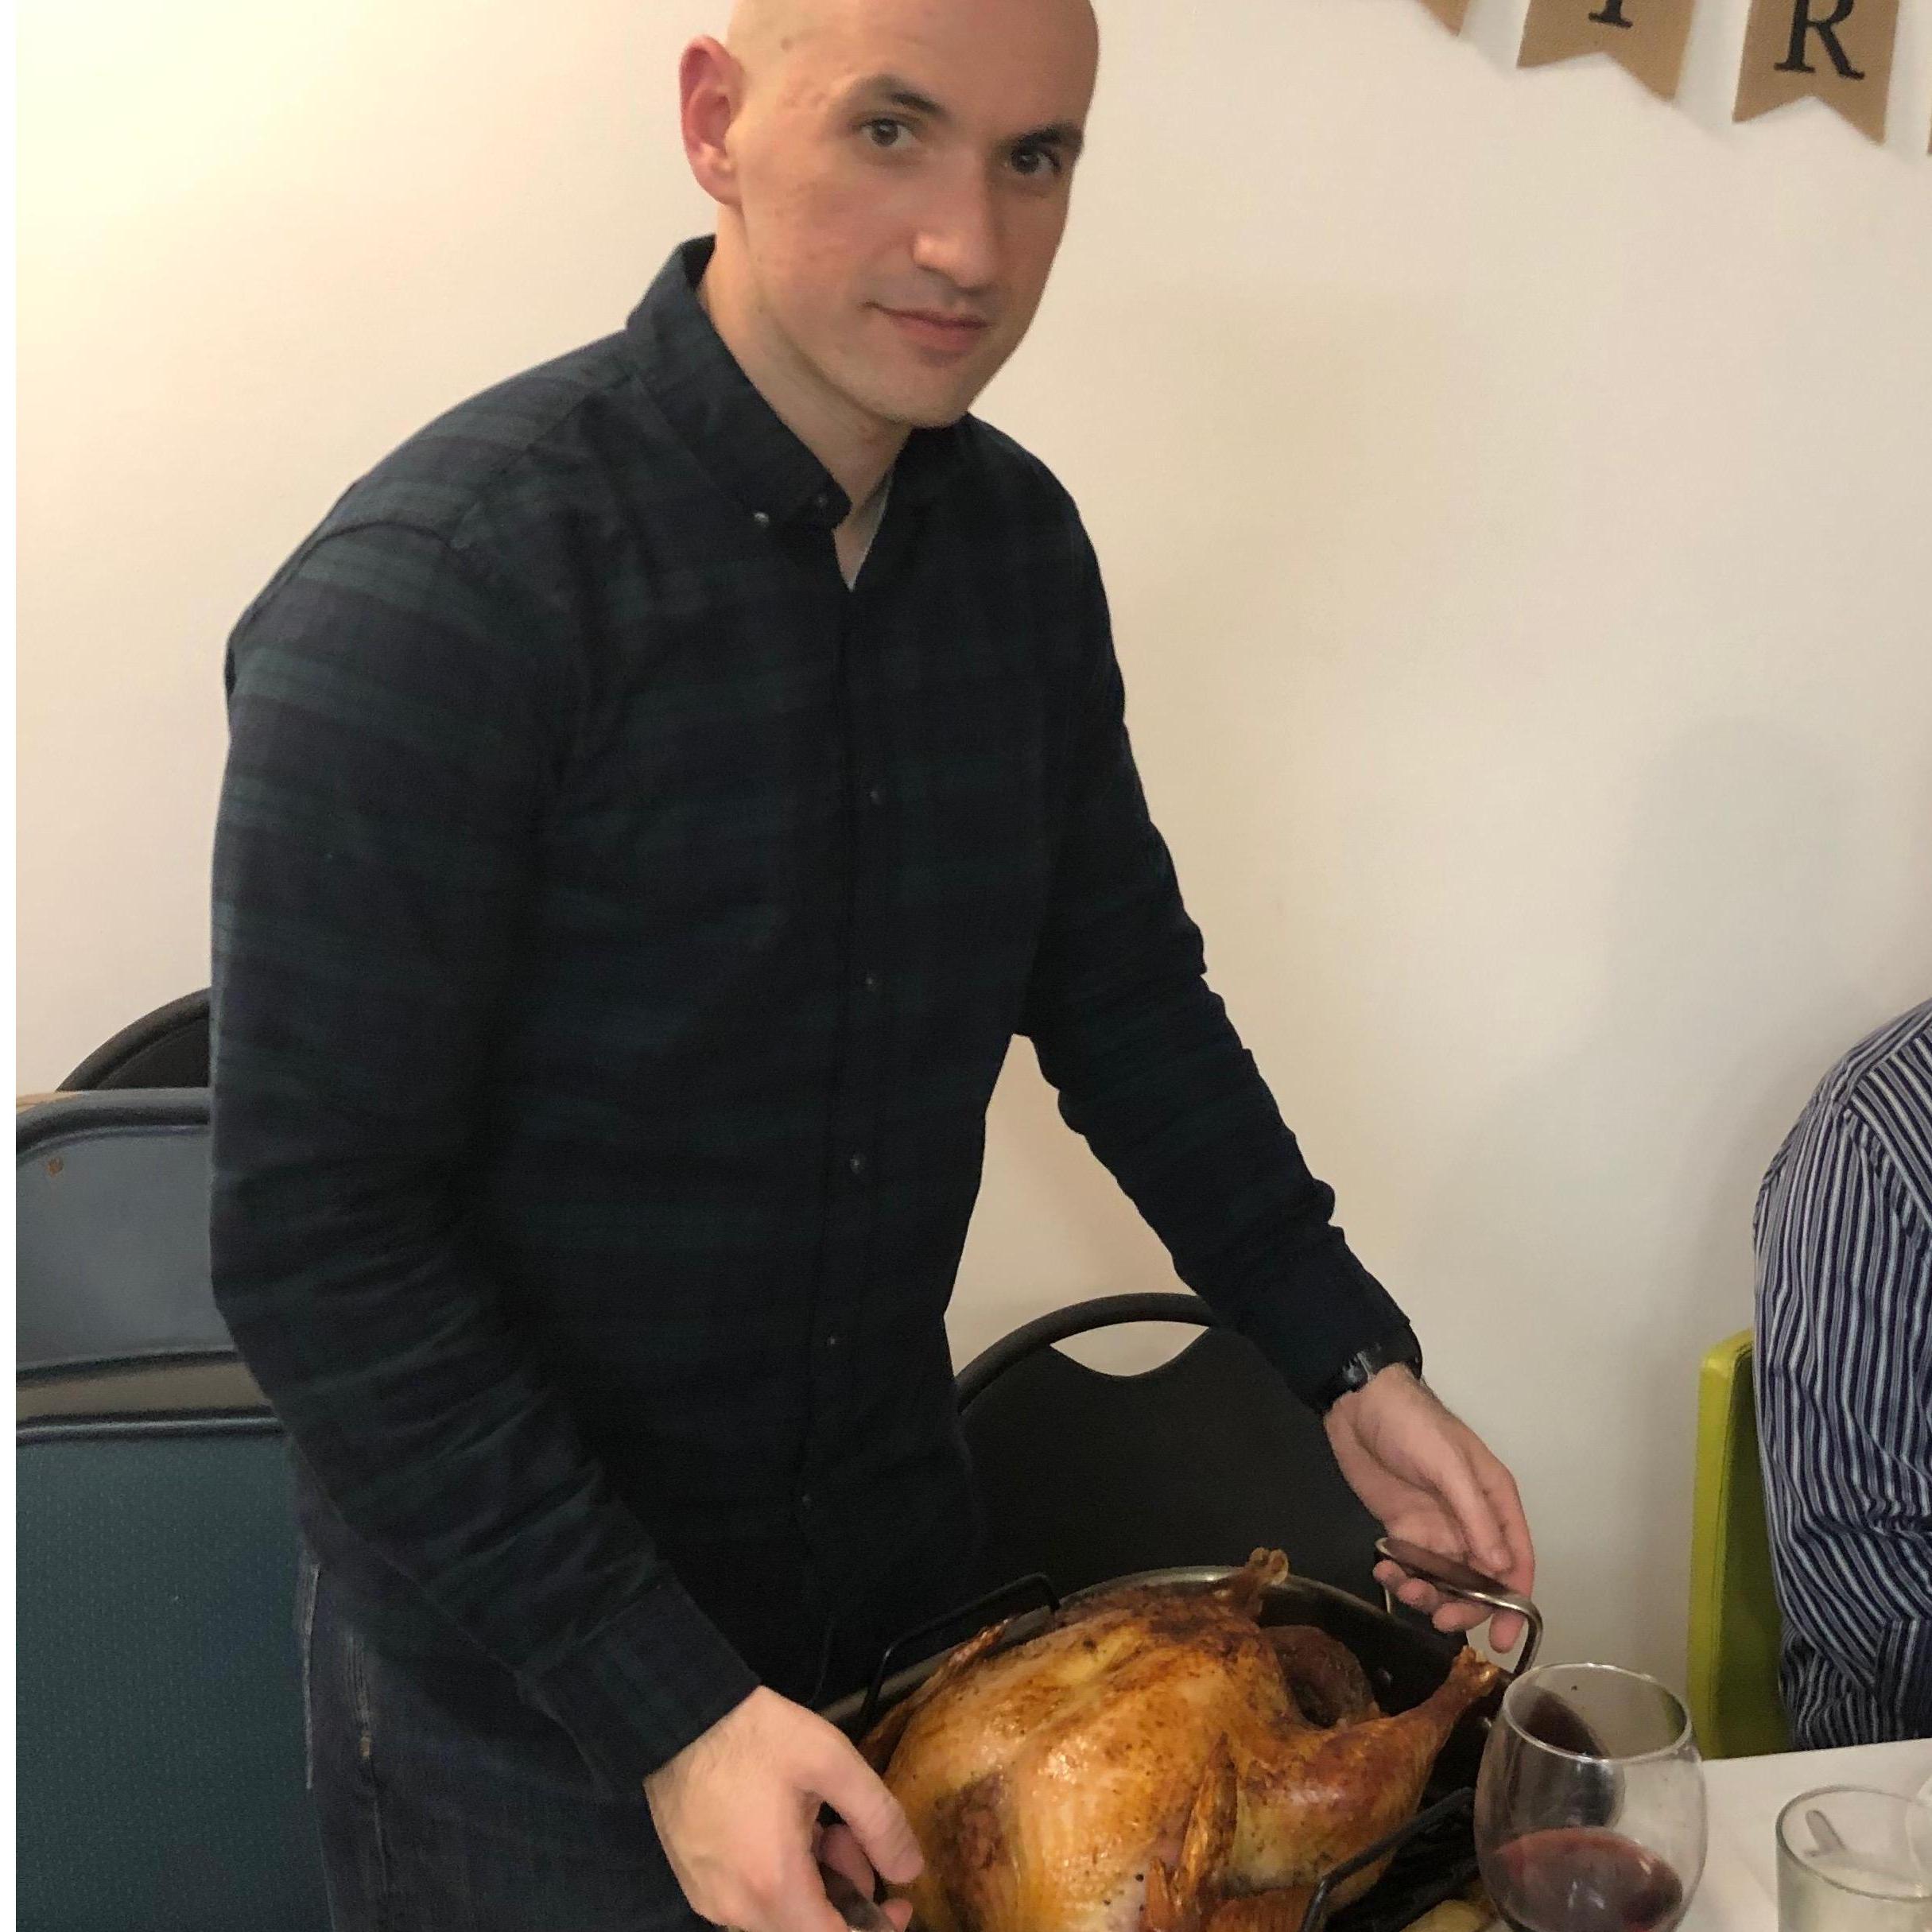 Made a turkey on thanksgiving!